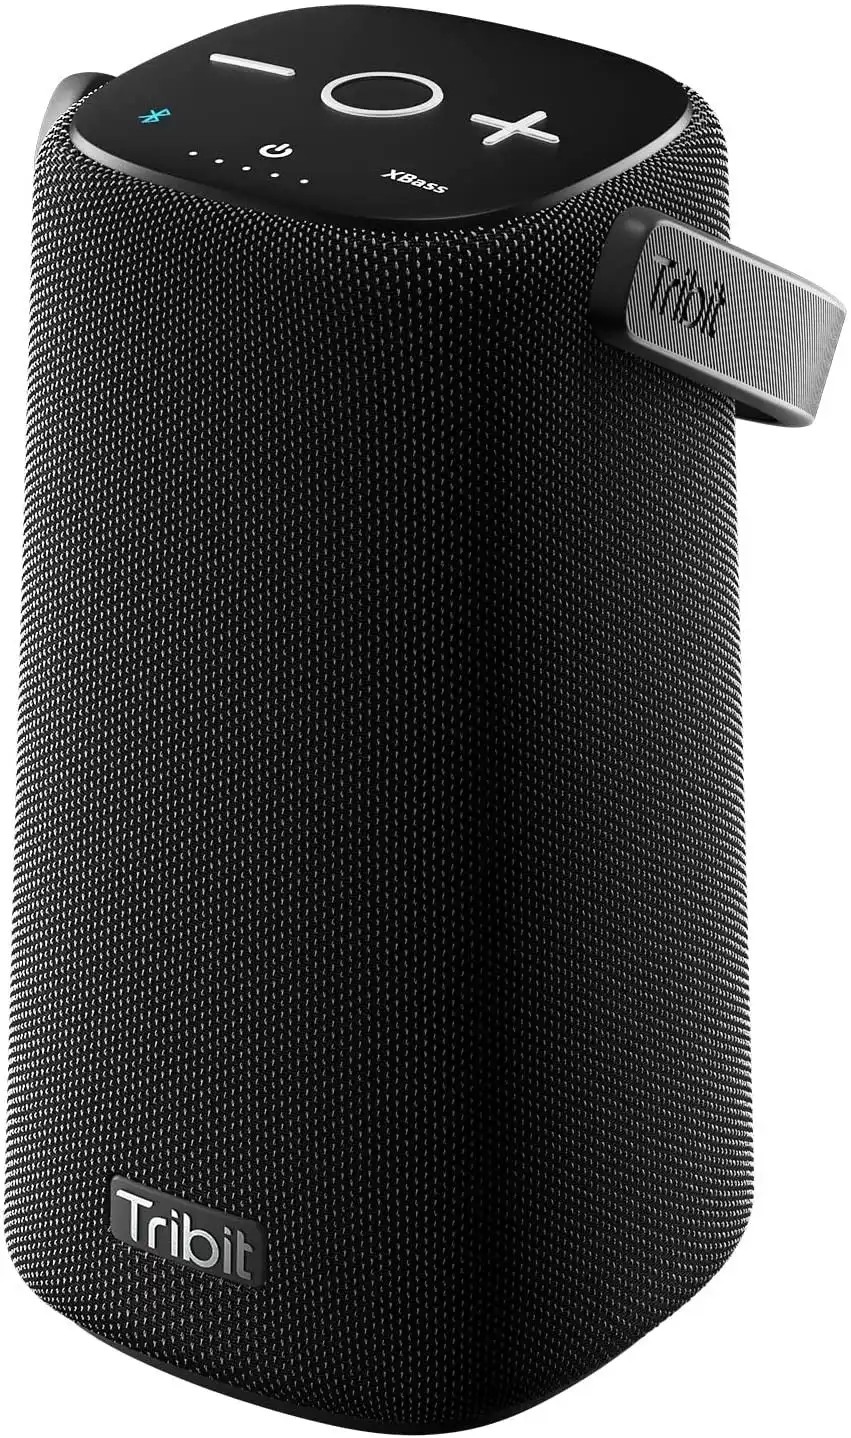 Tribit StormBox Pro Portable Bluetooth Speaker with High Fidelity 360° Sound Quality, 3 Drivers with 2 Passive Radiators, Exceptional Built-in XBass,